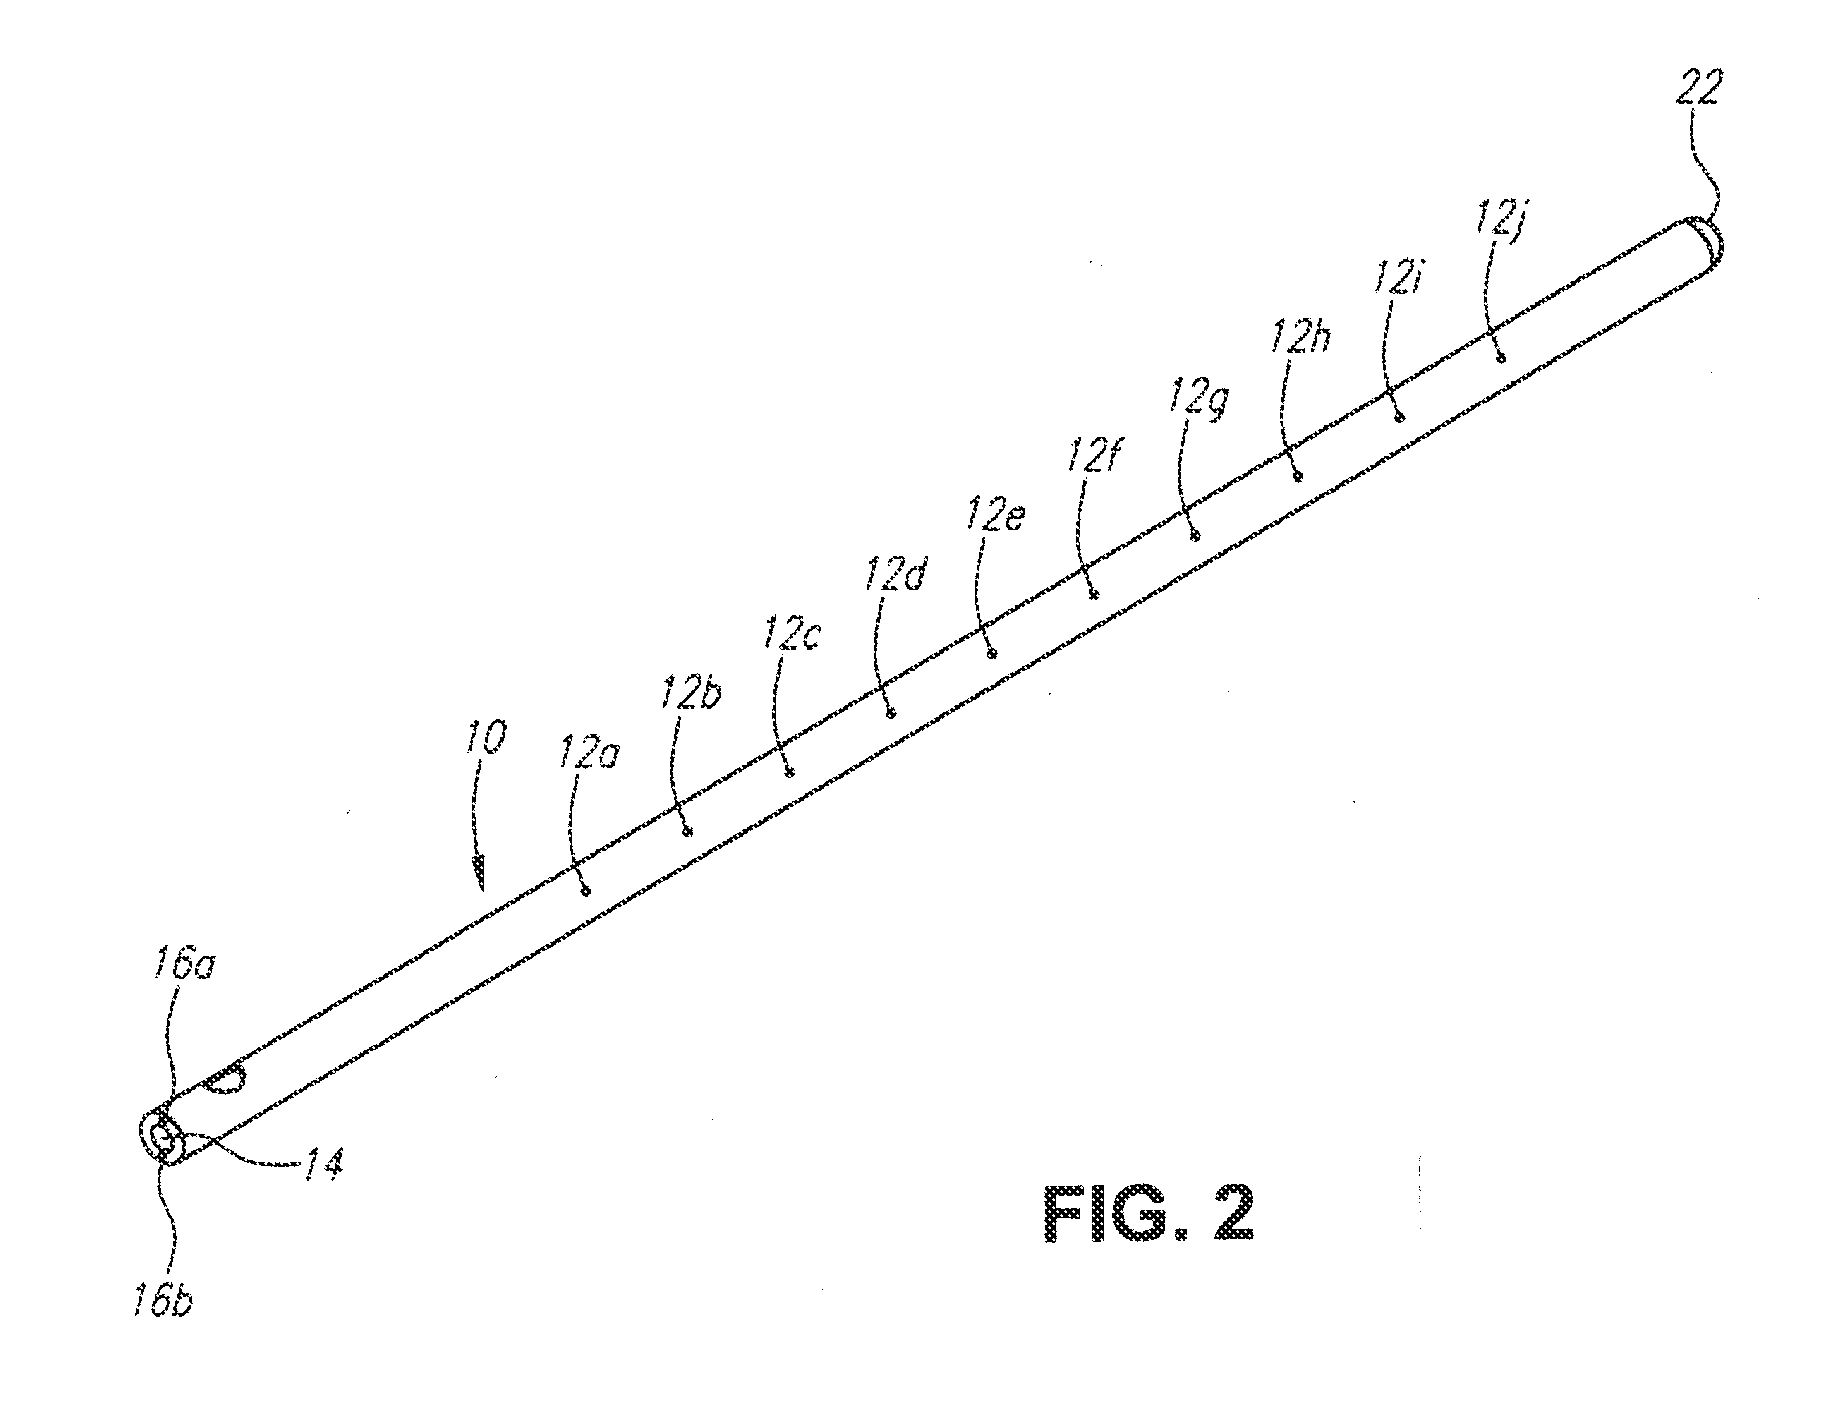 Methods and devices for non-invasive cerebral and systemic cooling